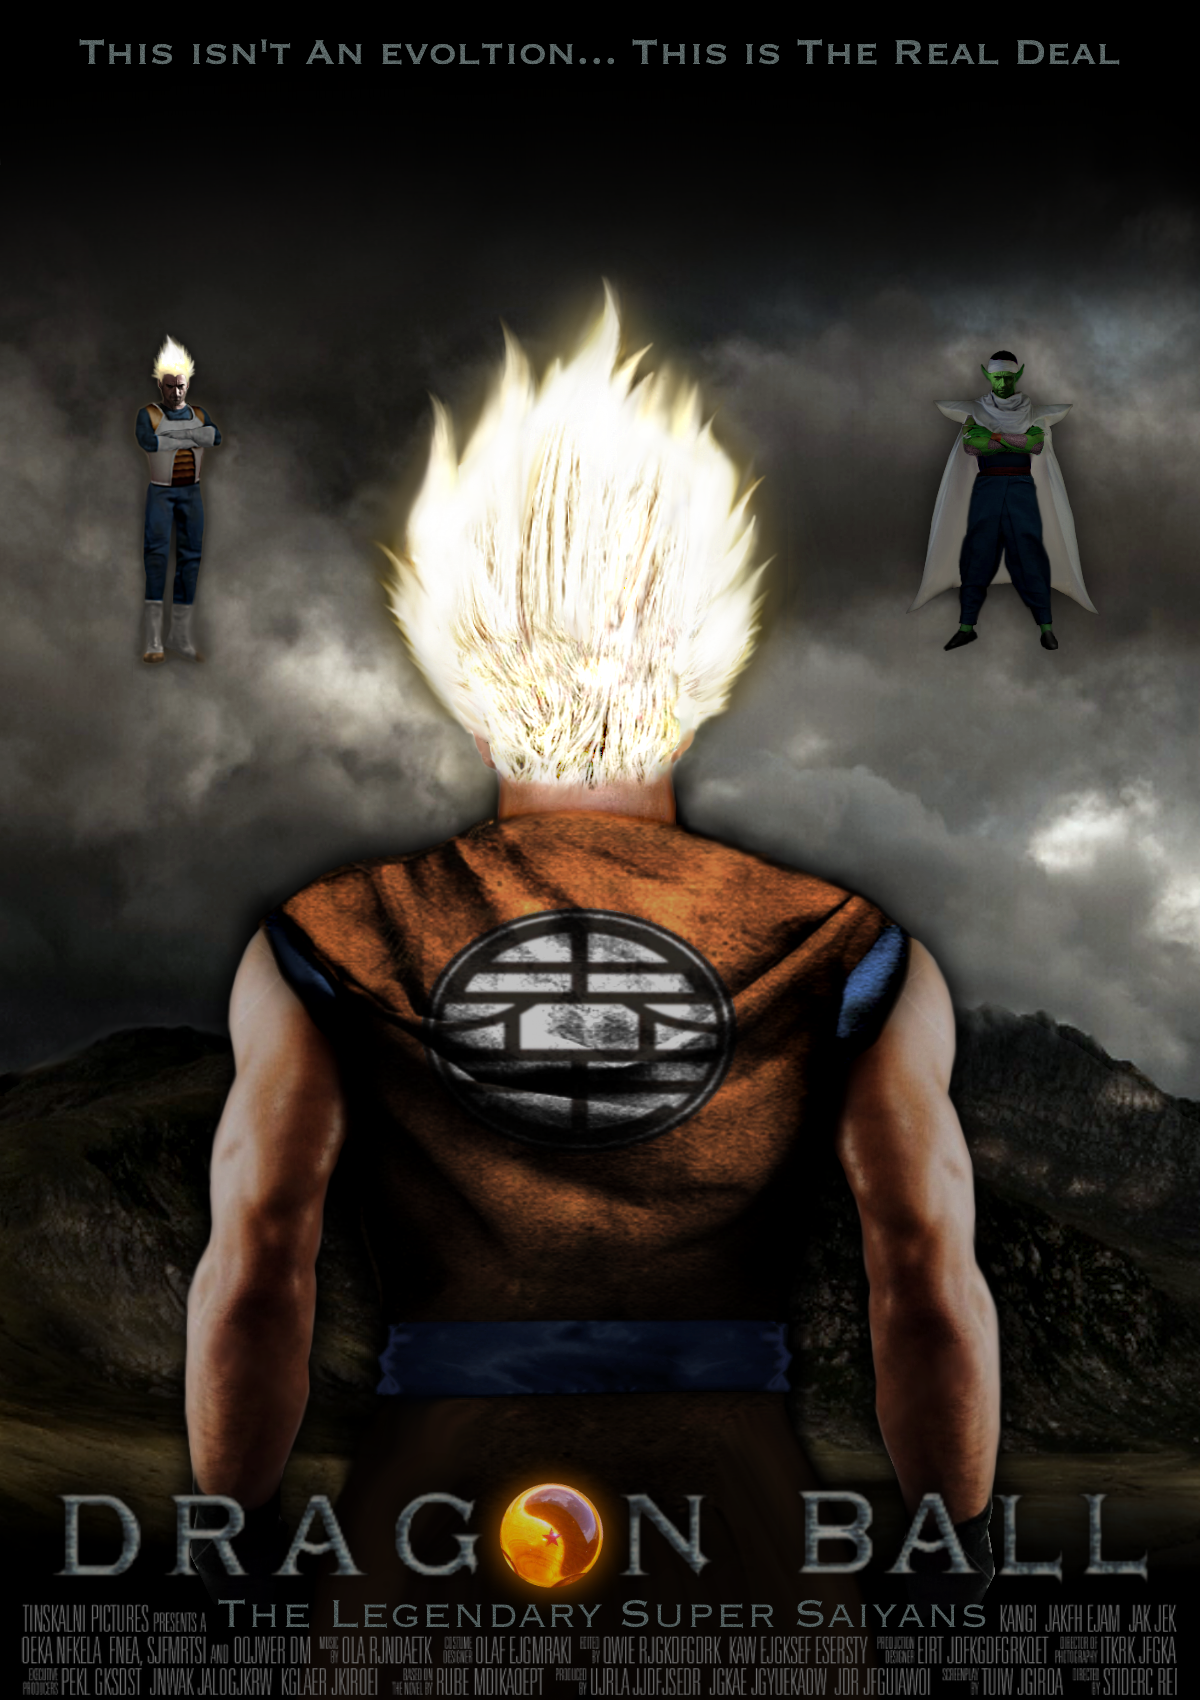 Dragon Ball Live action movie poster by Tony-Antwonio on DeviantArt